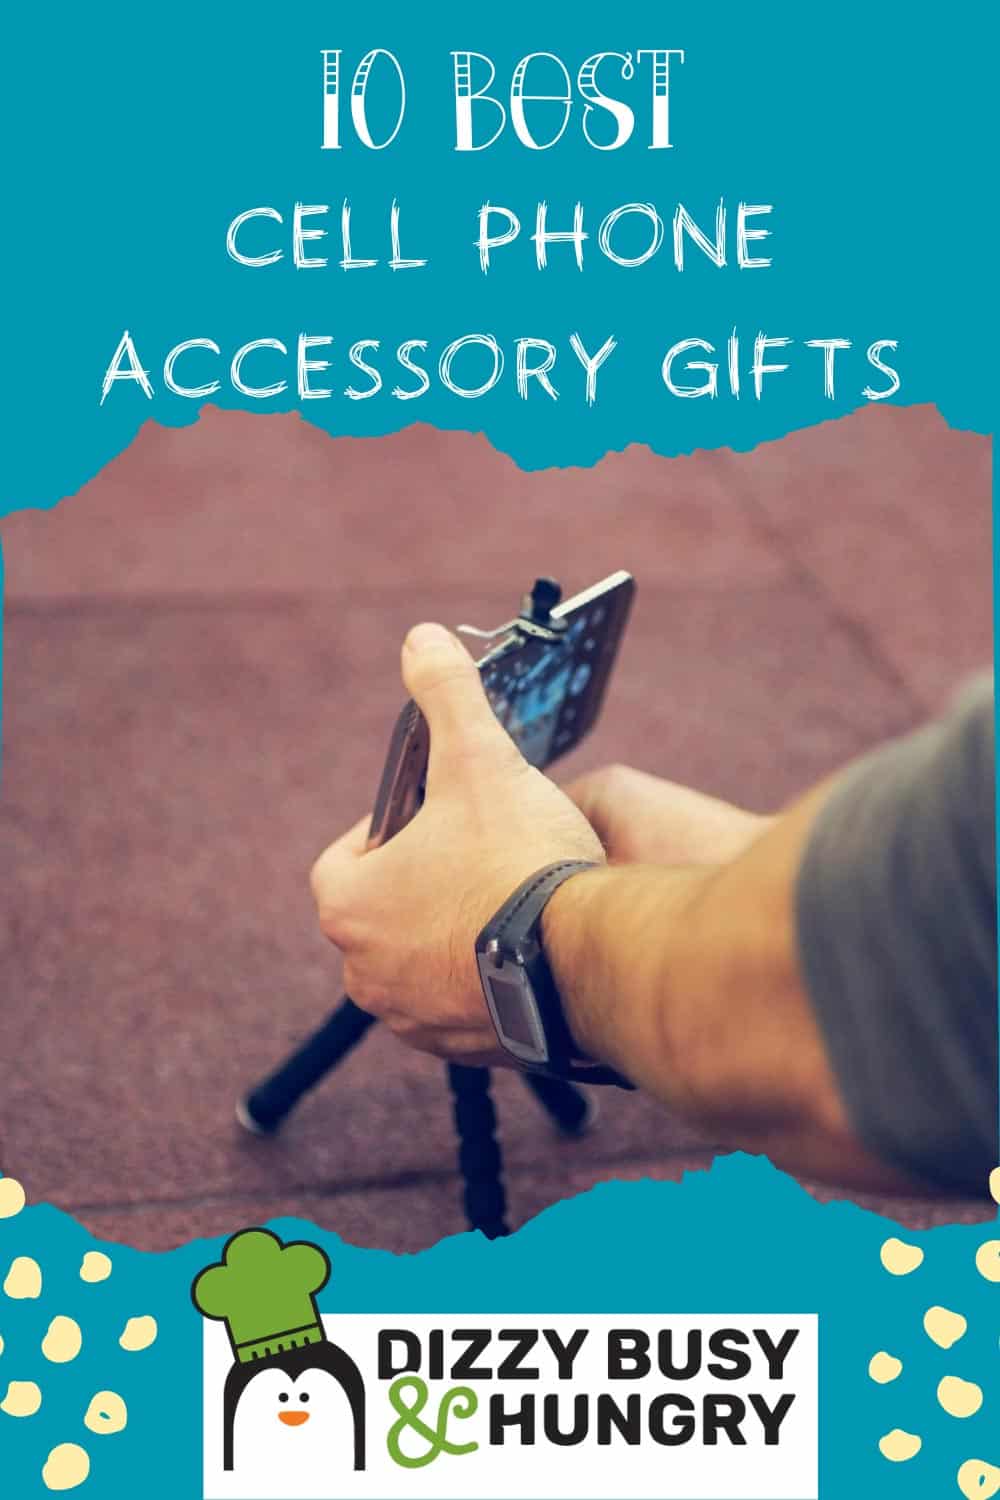 The hands of man are reaching in to set up a cell phone on a tripod stand with the overlaying text 10 Best Cell Phone Accessory Gifts.